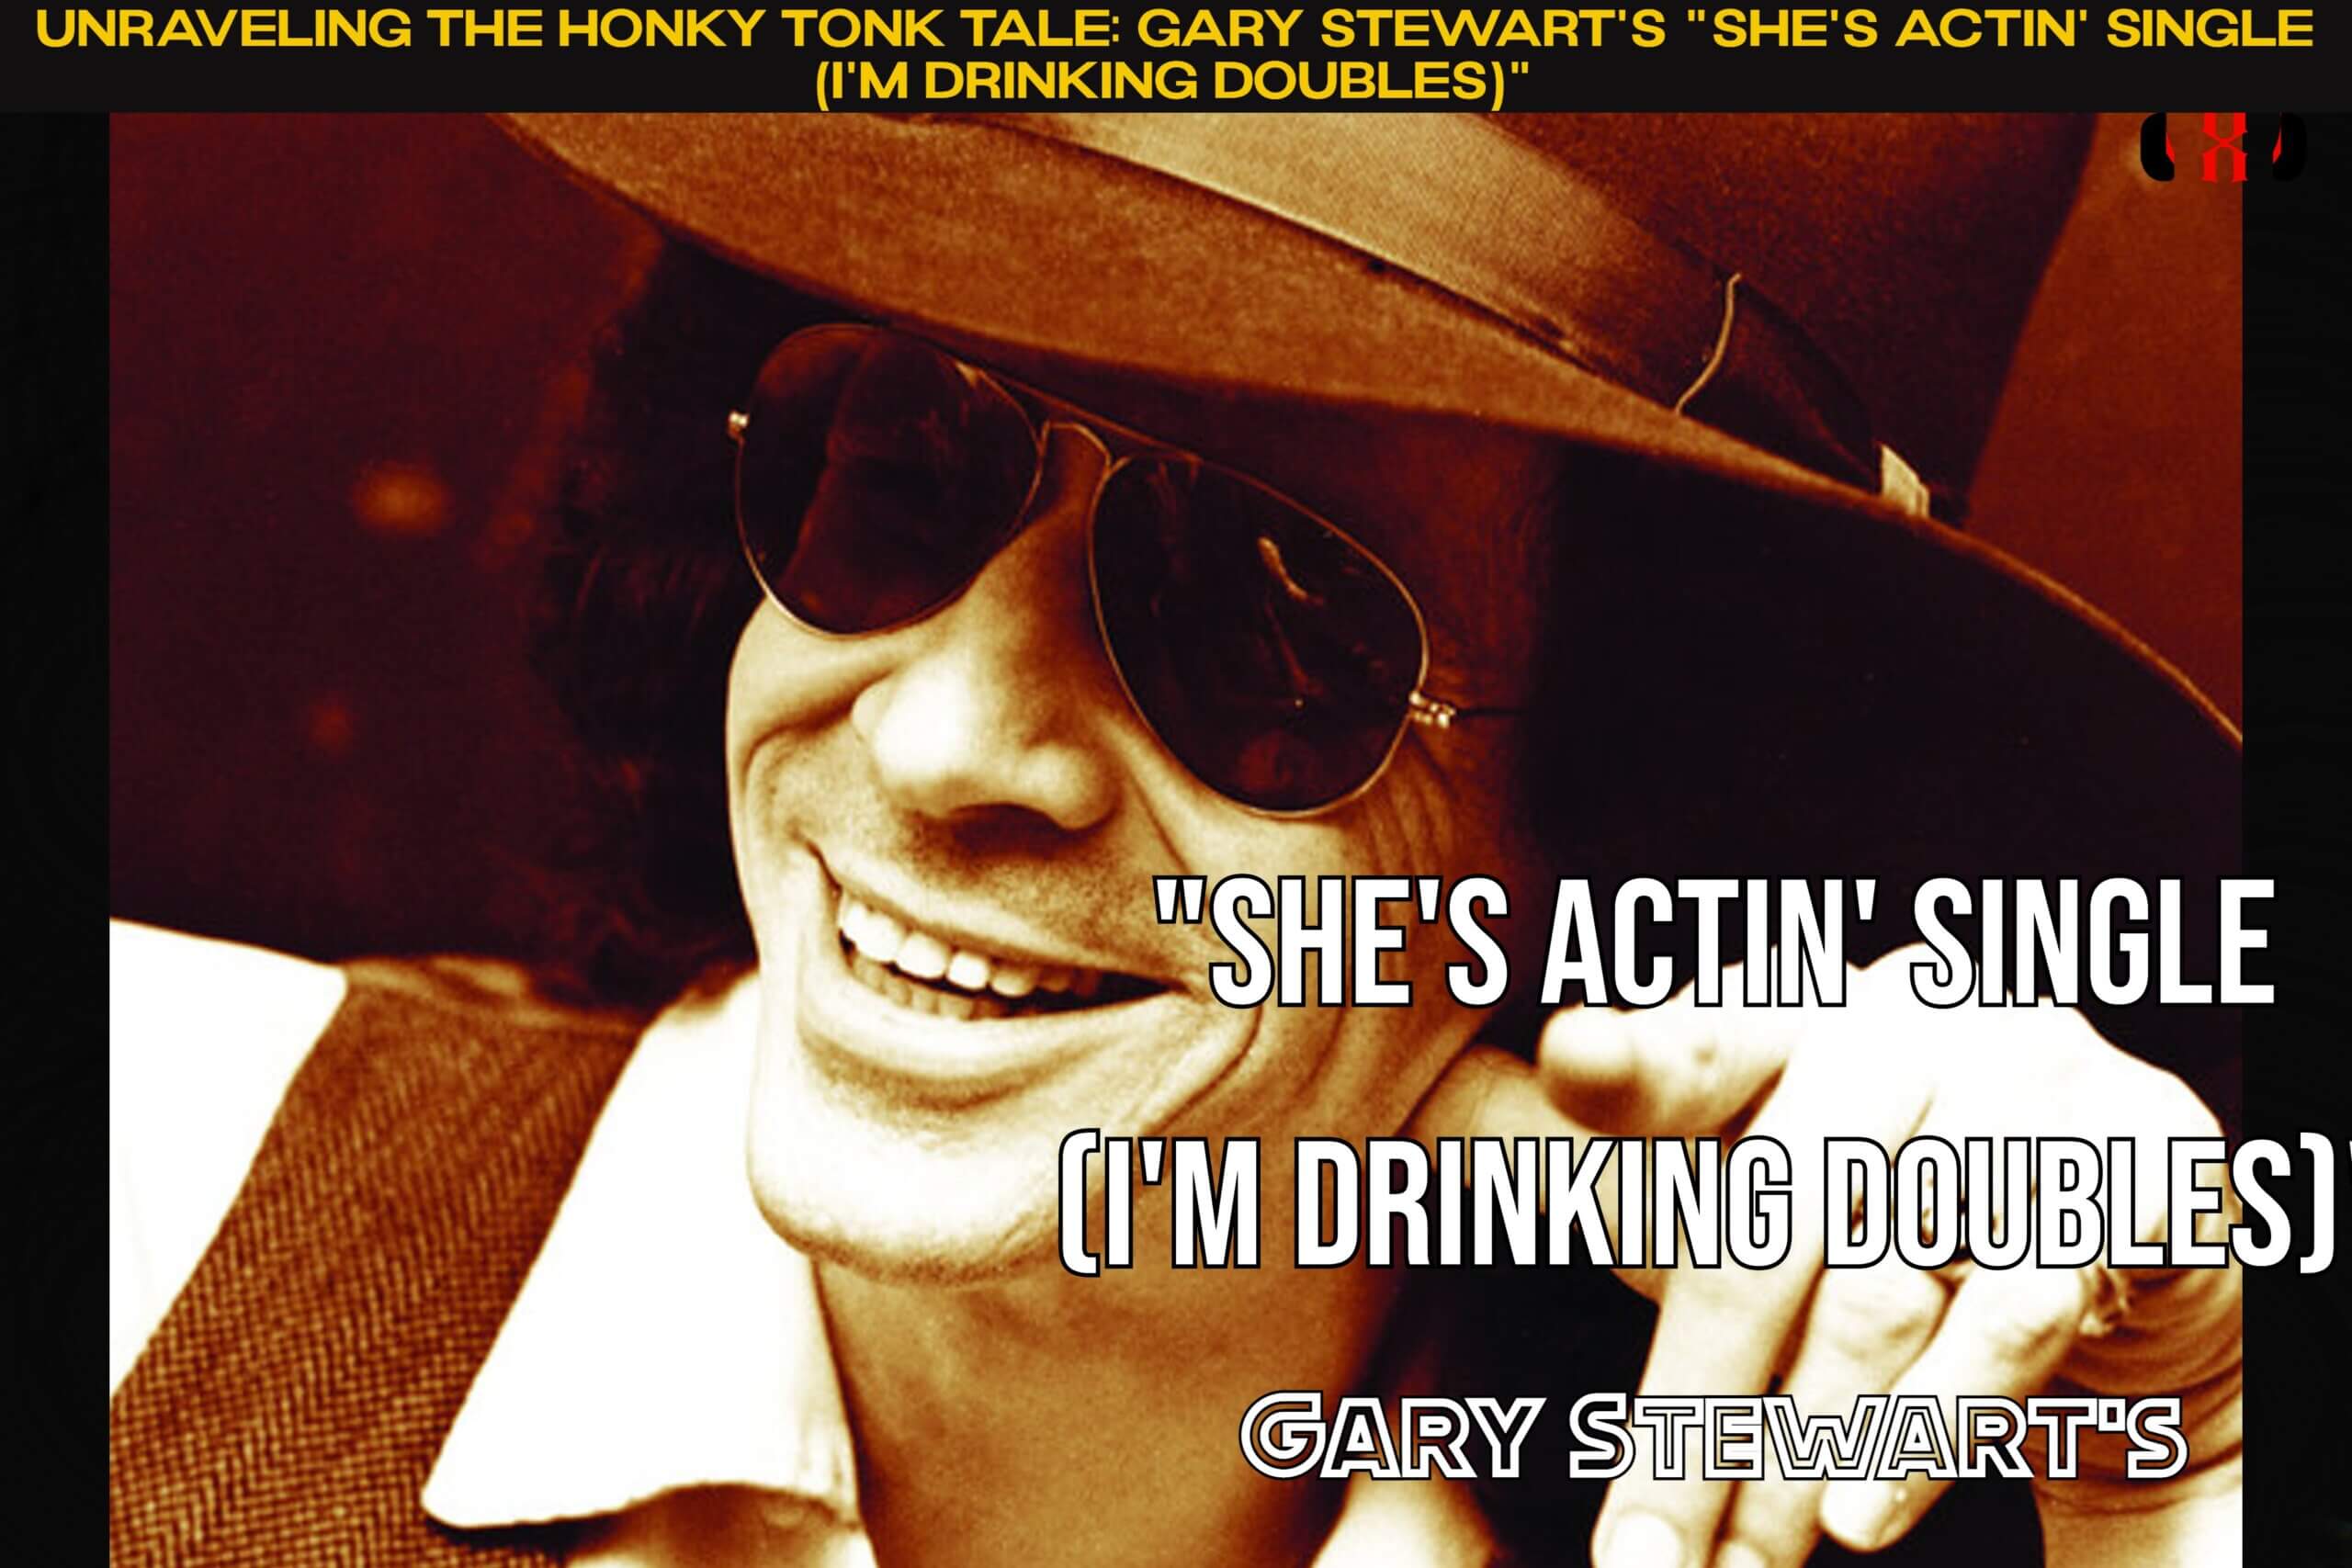 Unraveling the Honky Tonk Tale: Gary Stewart’s “She’s Actin’ Single (I’m Drinking Doubles)”